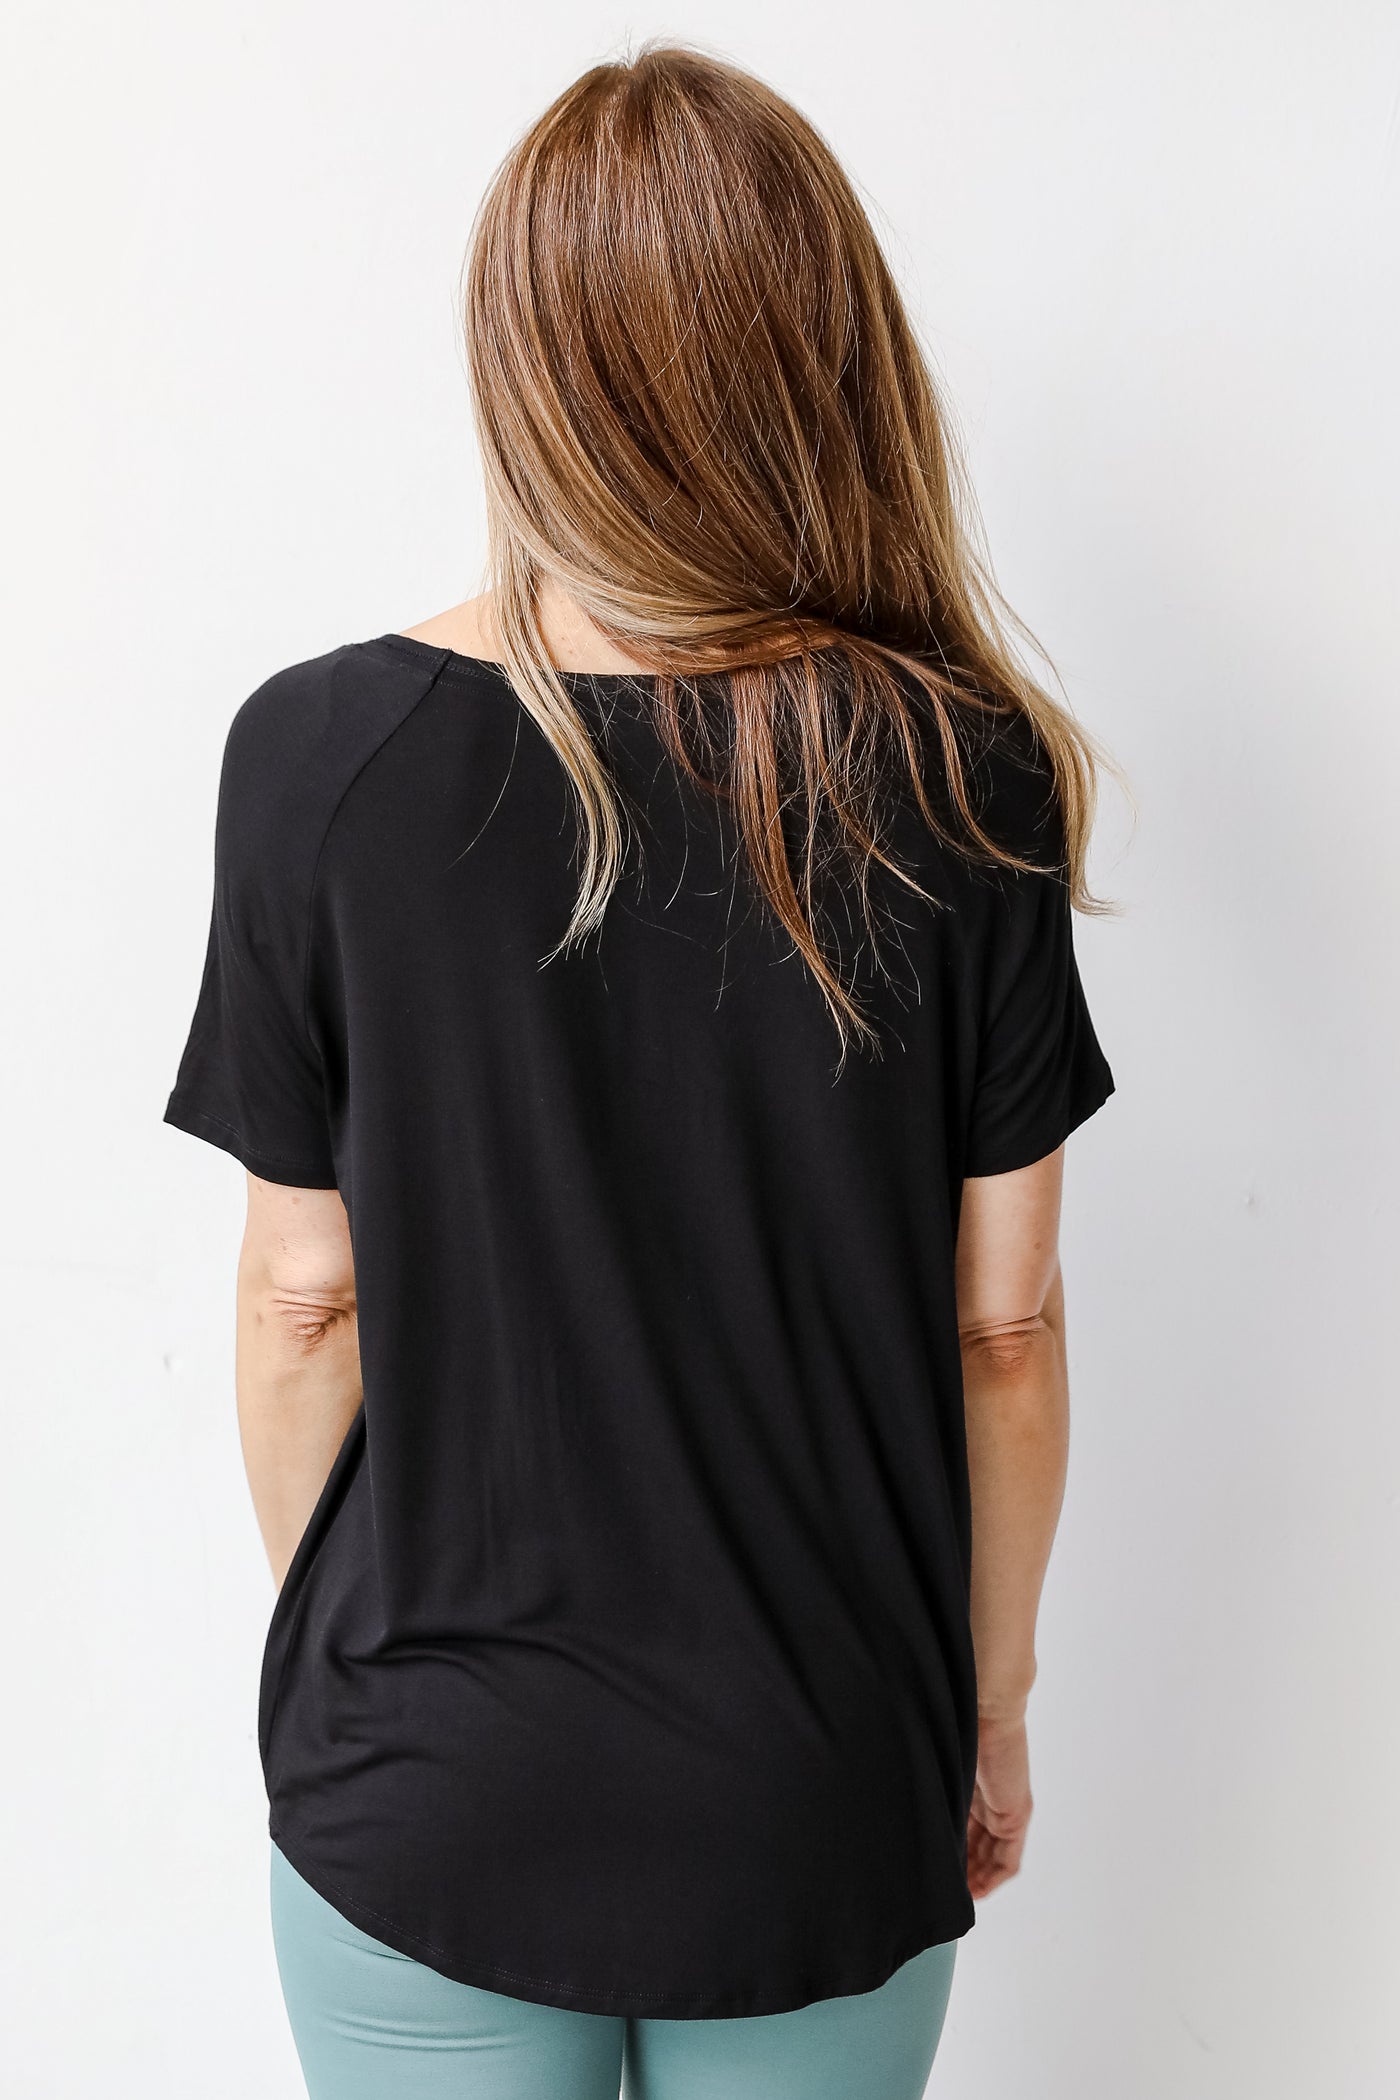 Everyday Tee in black back view